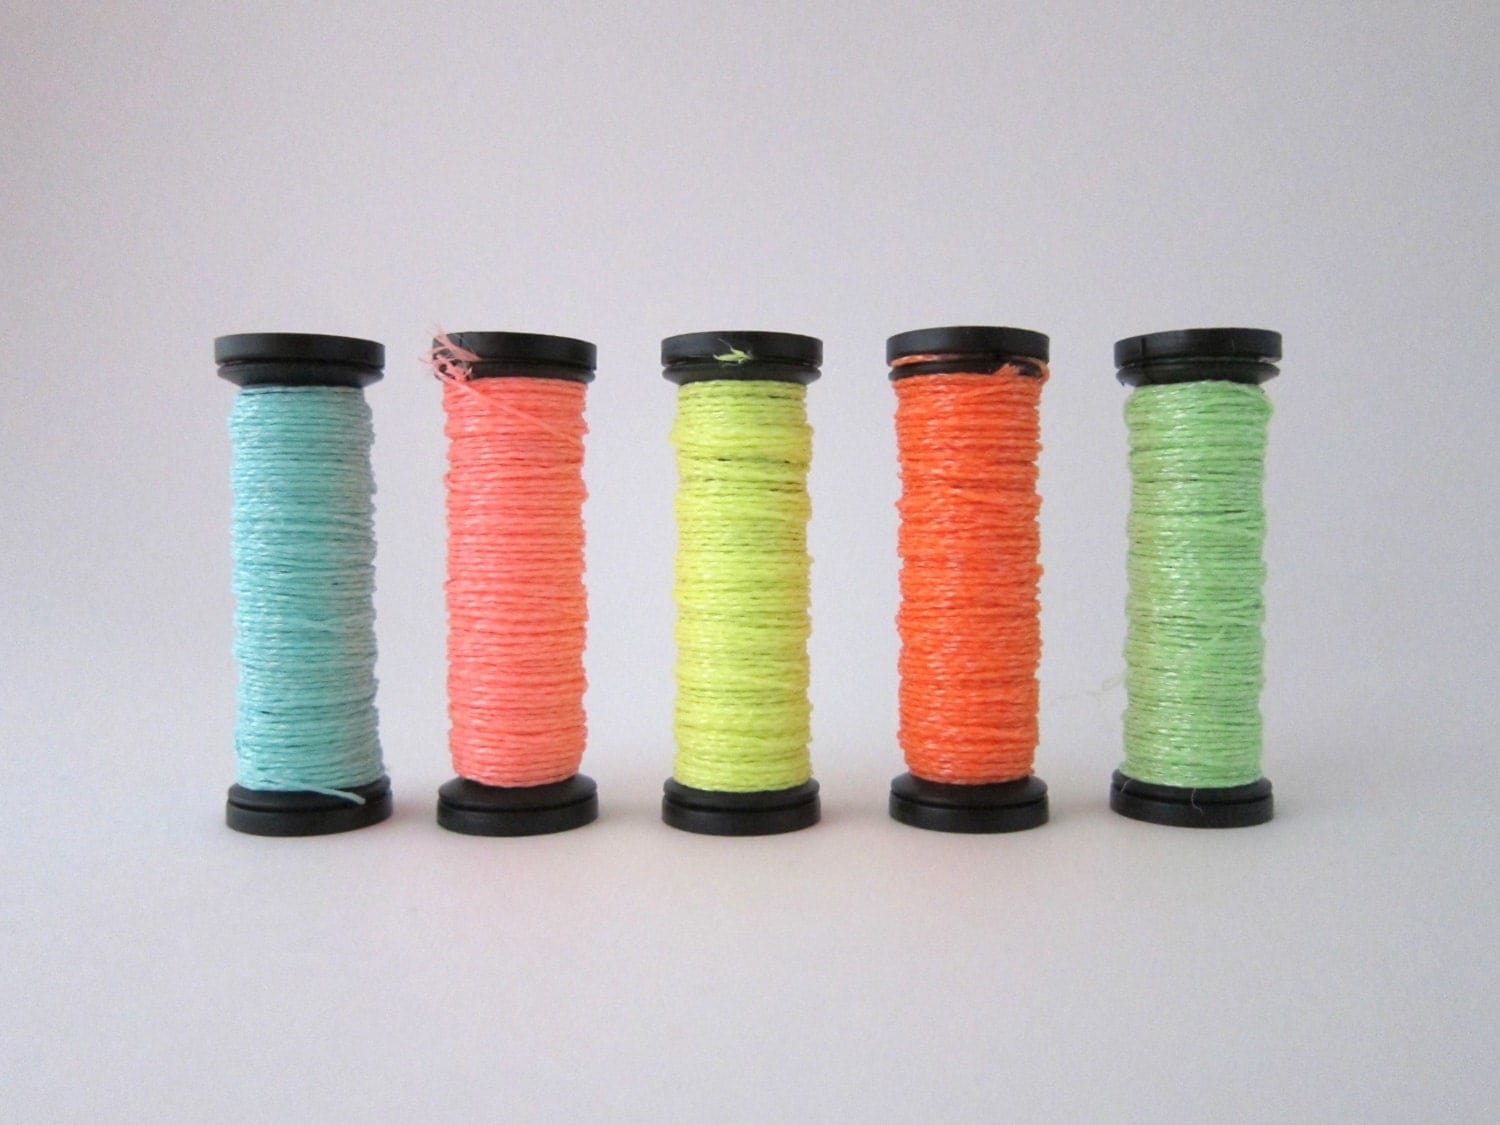 Glow in the Dark Thread Hand Embroidery Floss in Bright Neon